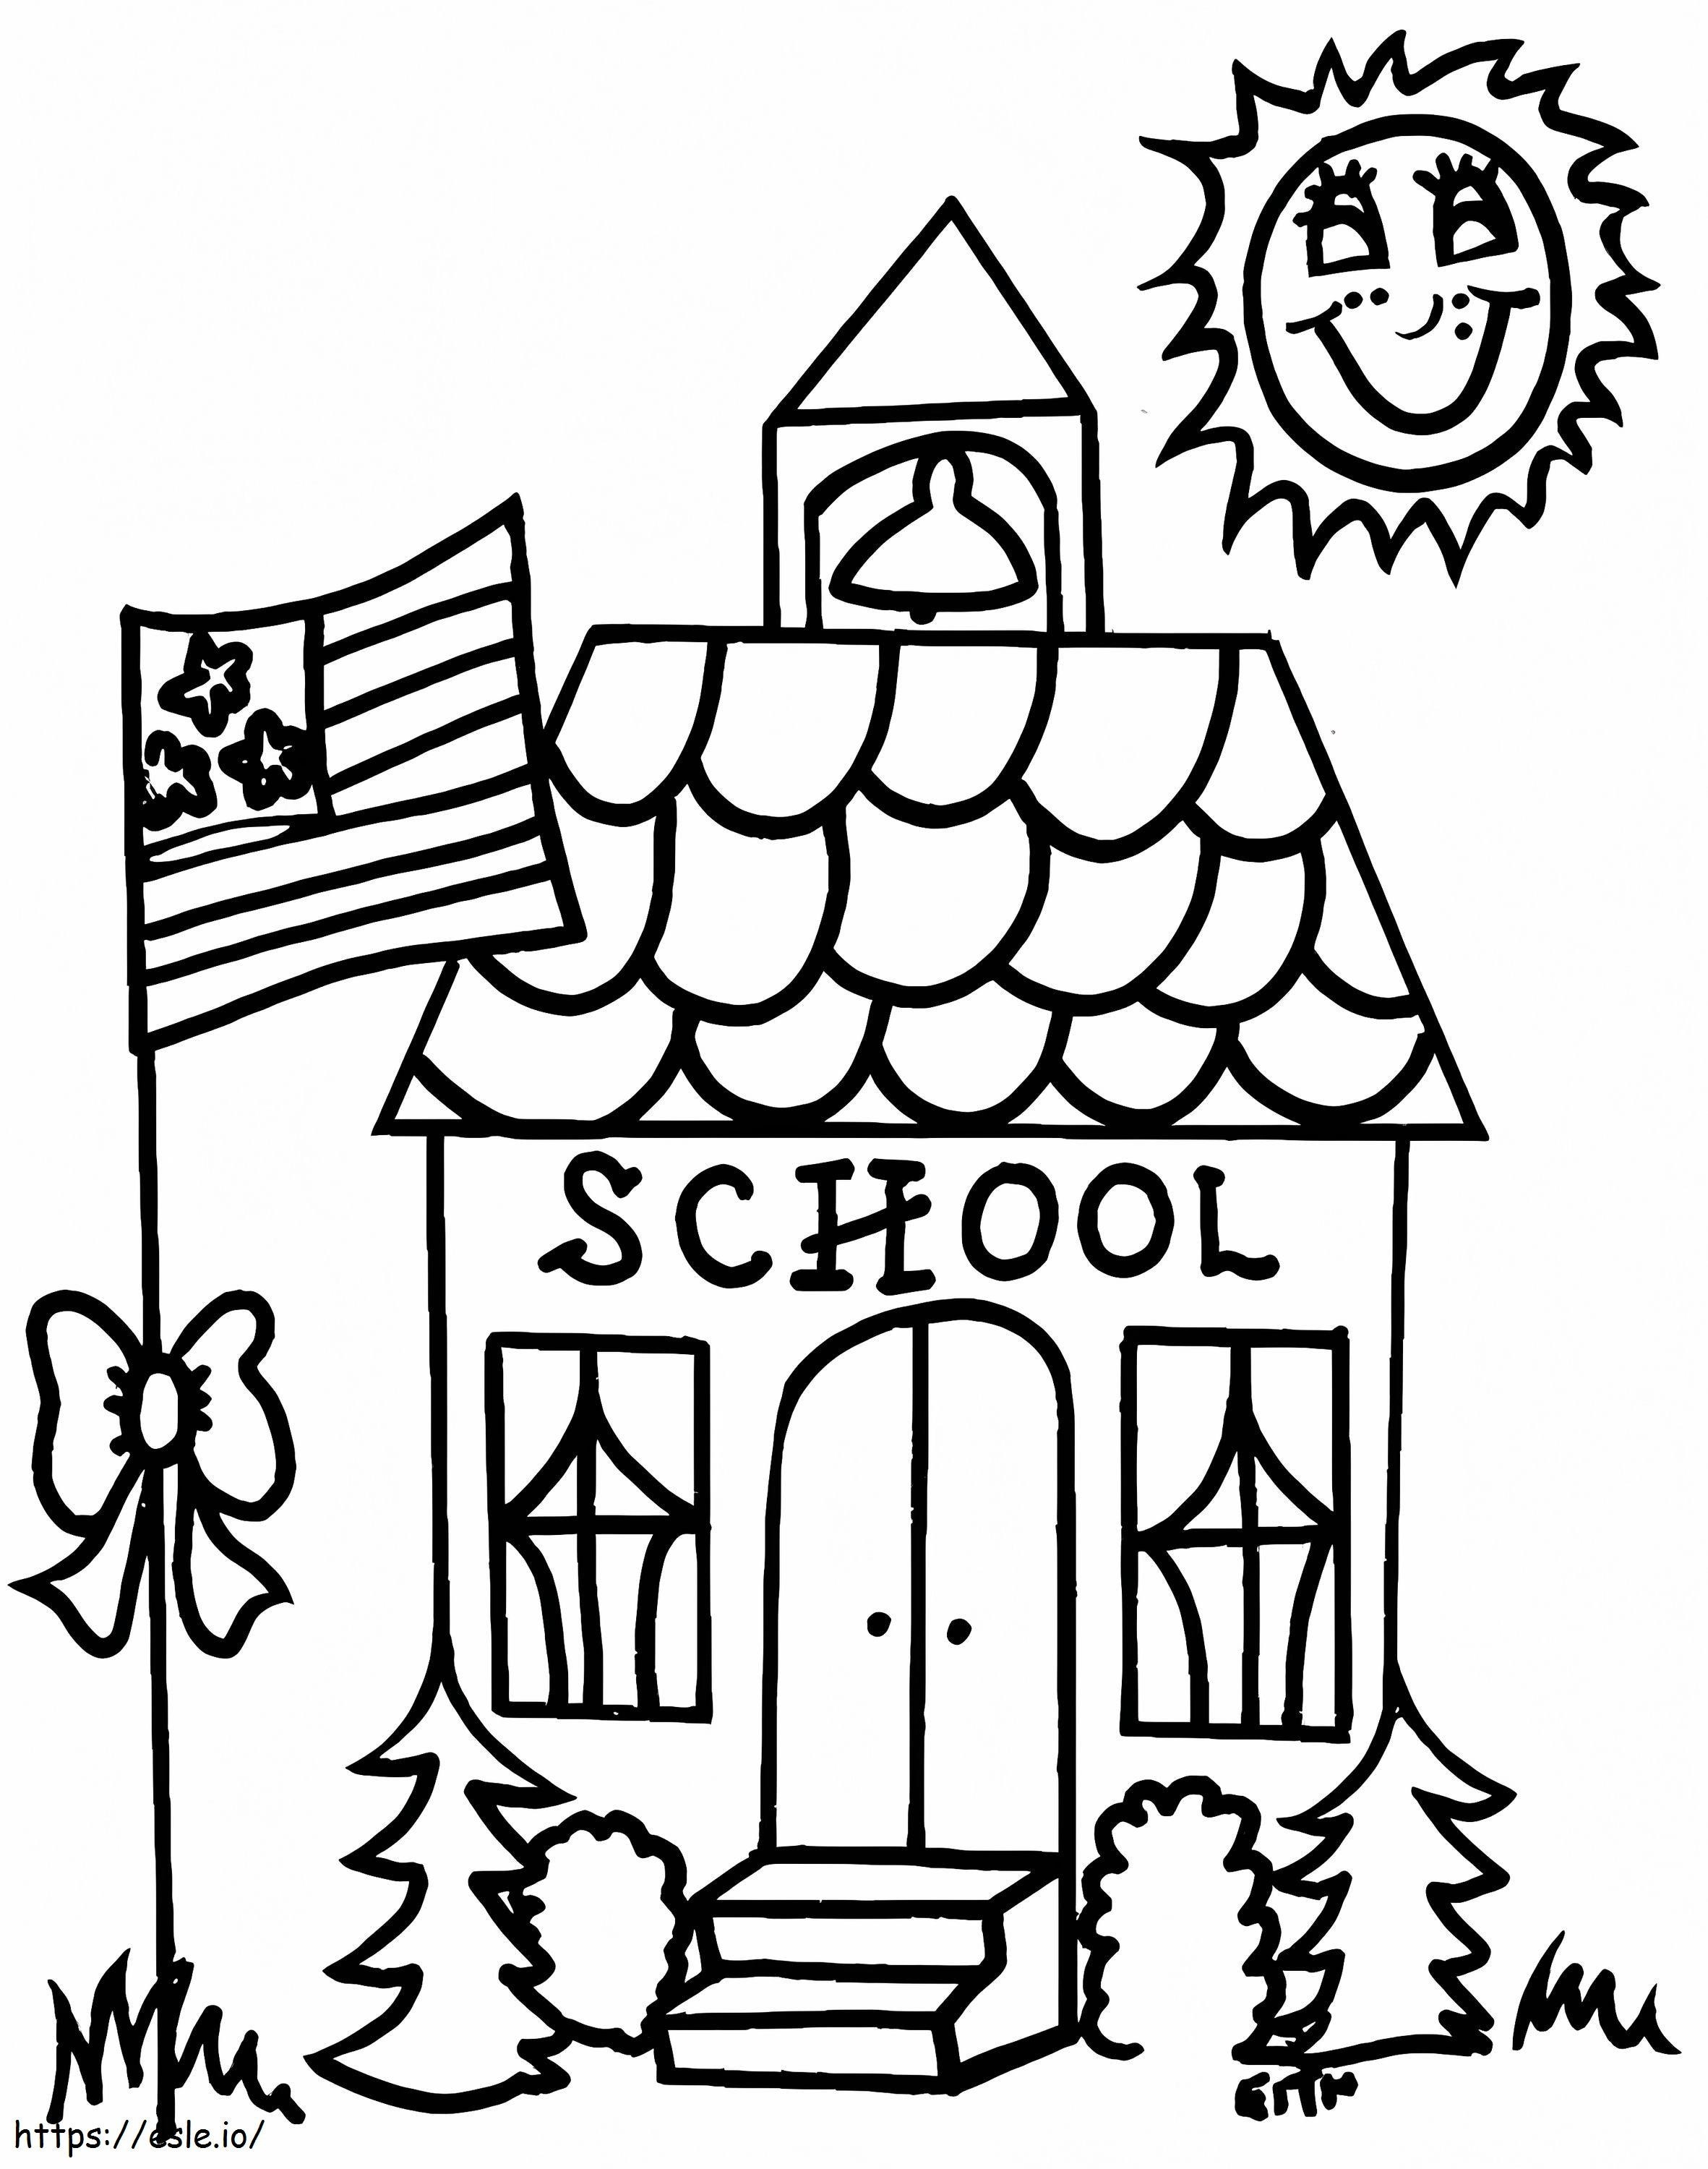 Primary School coloring page